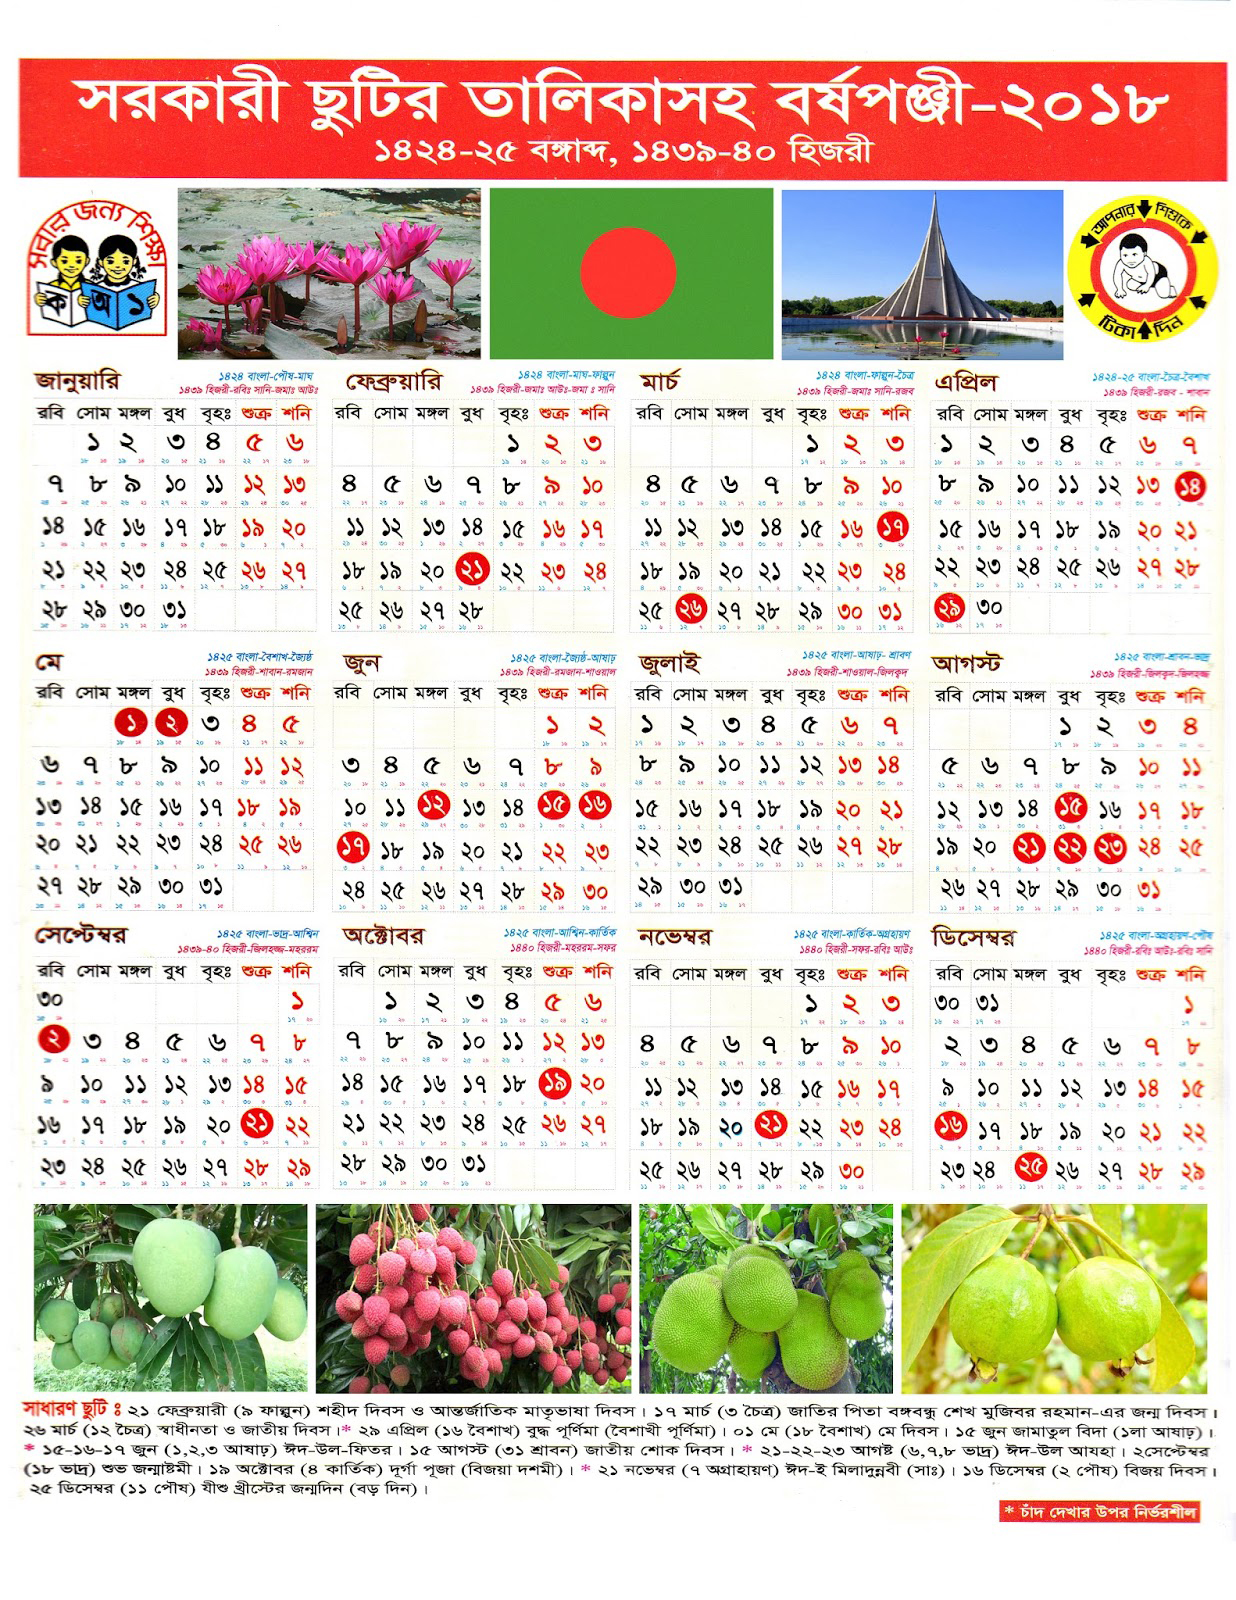 bd govt holiday calendea 2018 page 1